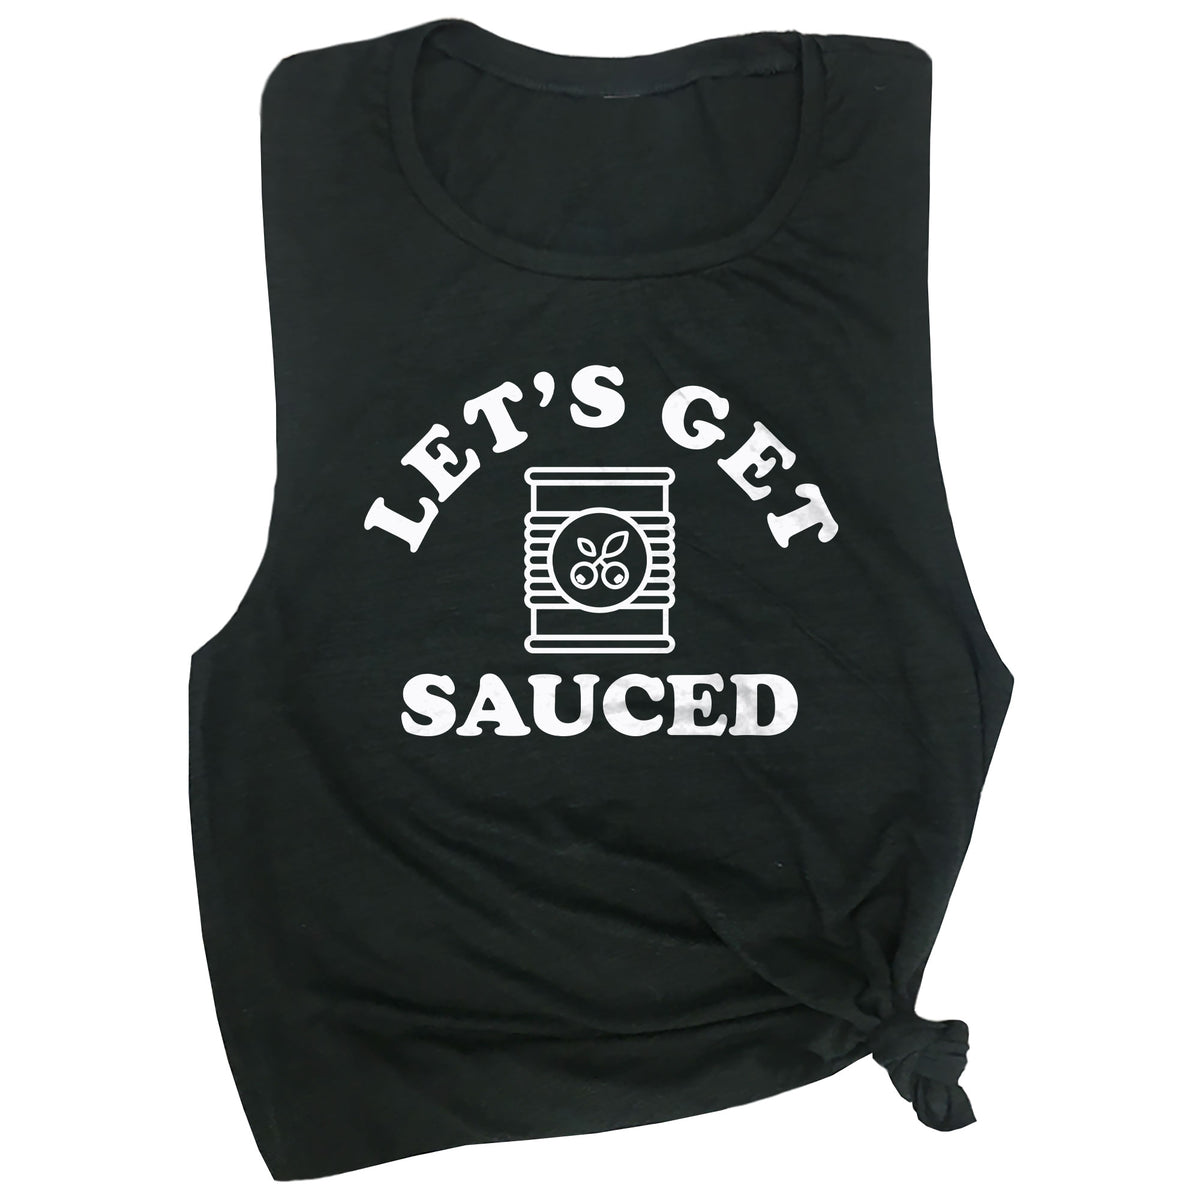 Let's Get Sauced Muscle Tee